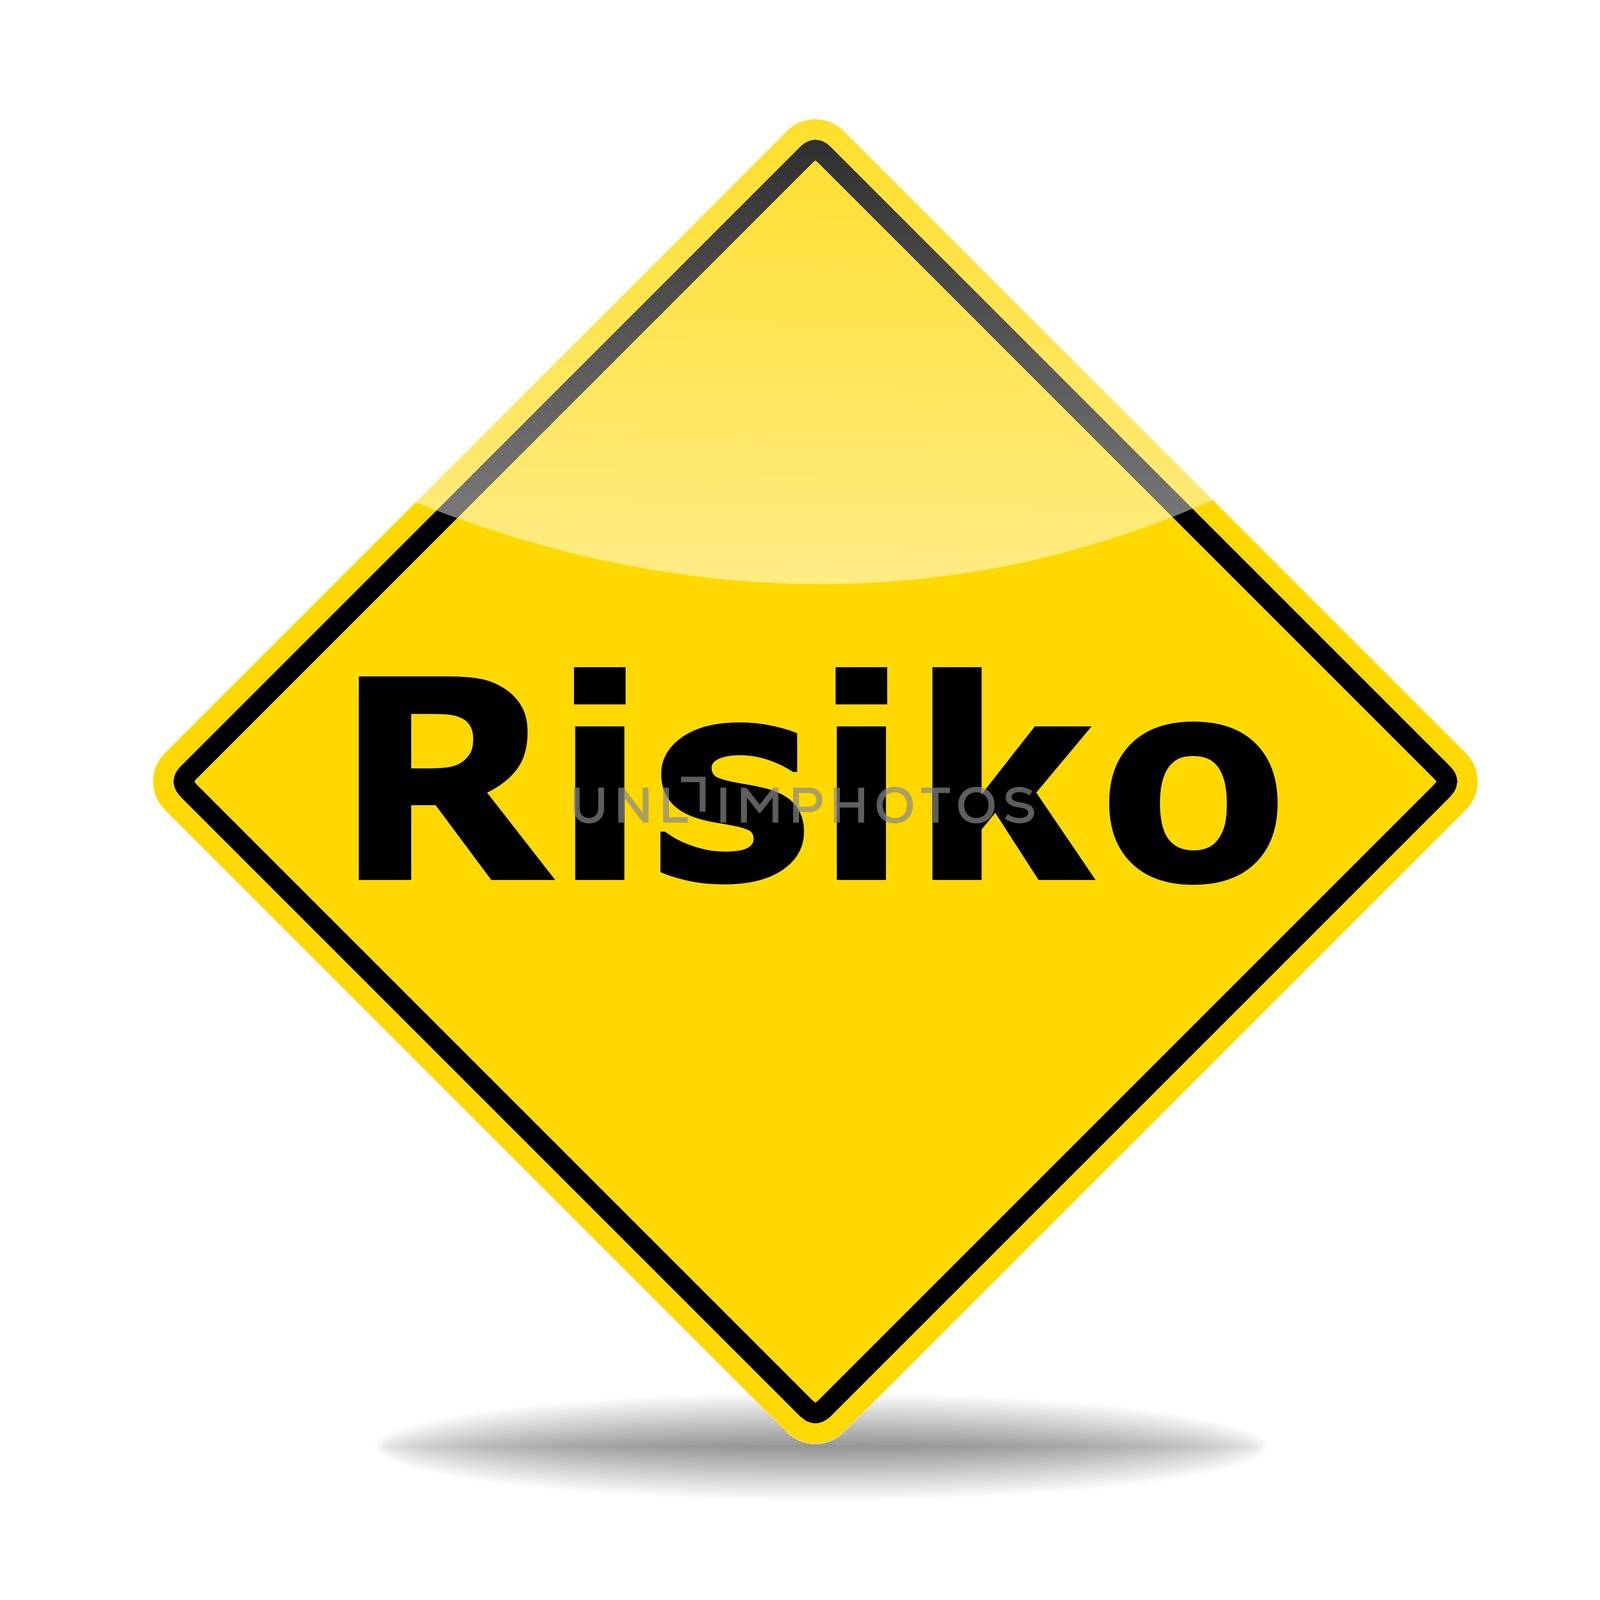 risk management concept with road sign isolated on white background